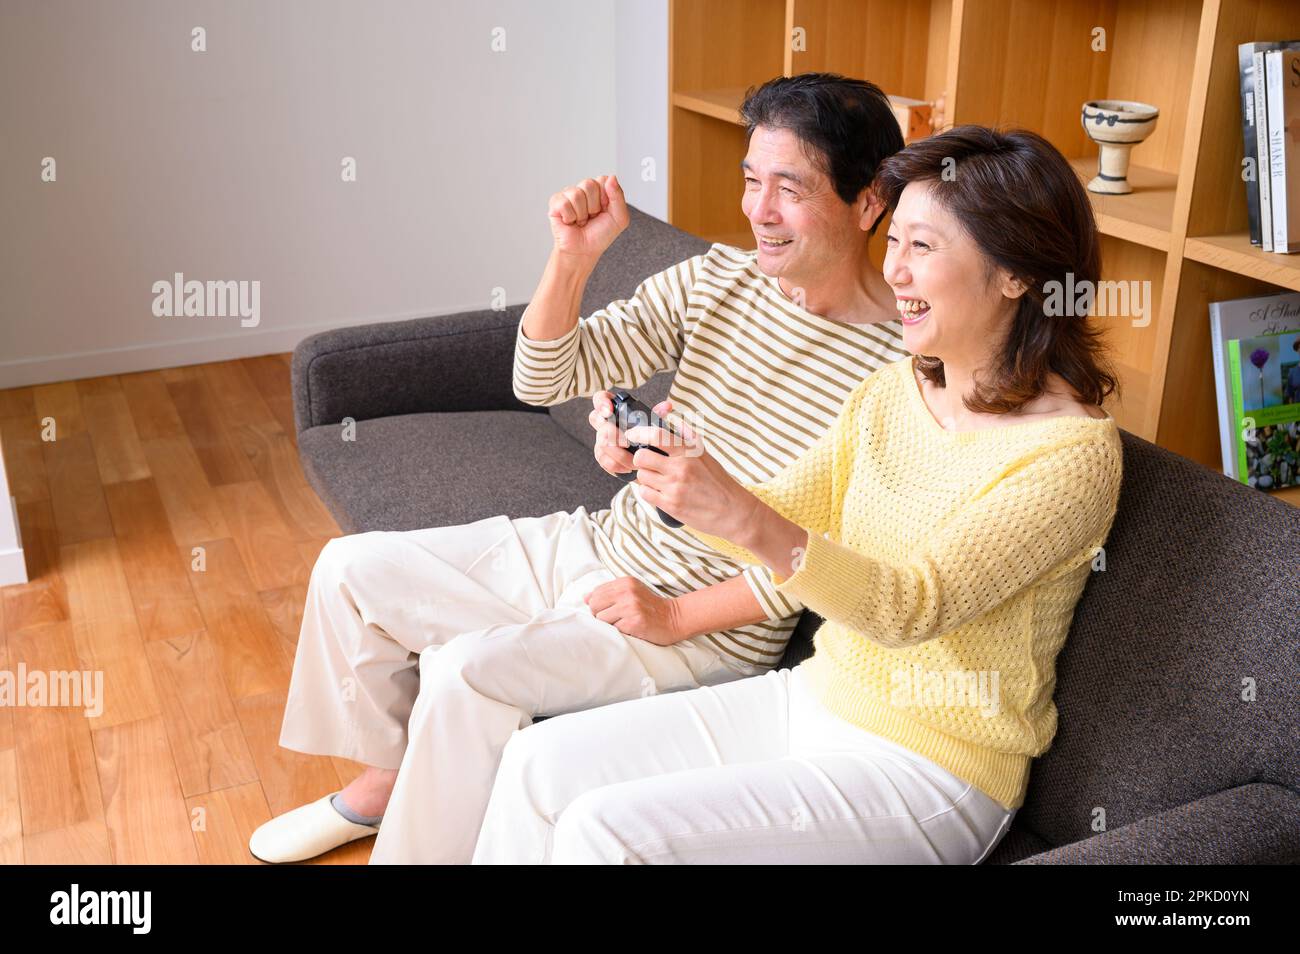 A middle-aged couple playing video games Stock Photo